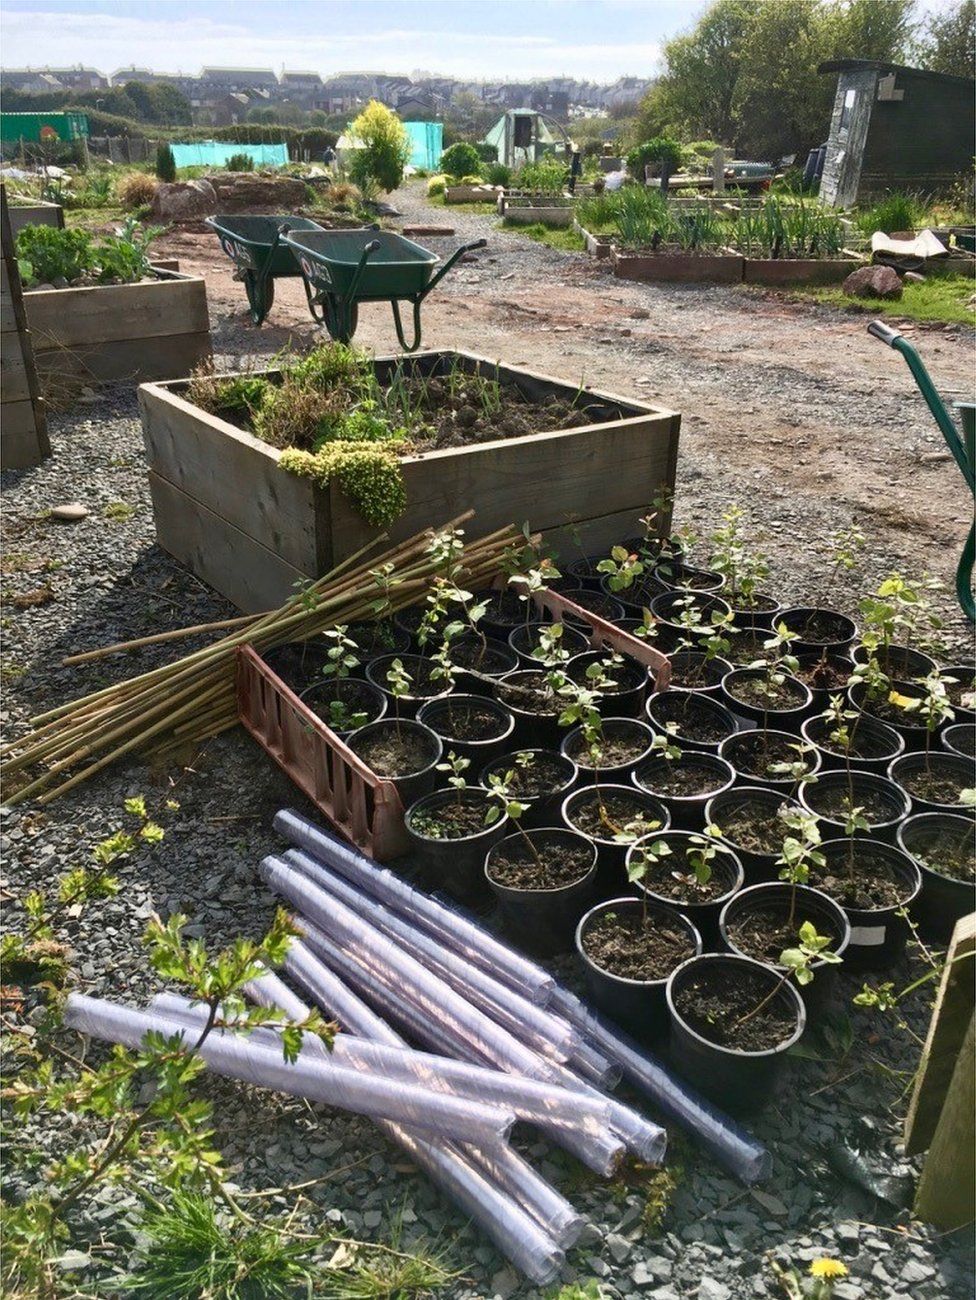 Furness growing nursery where aspens for Haverigg have been cultivated